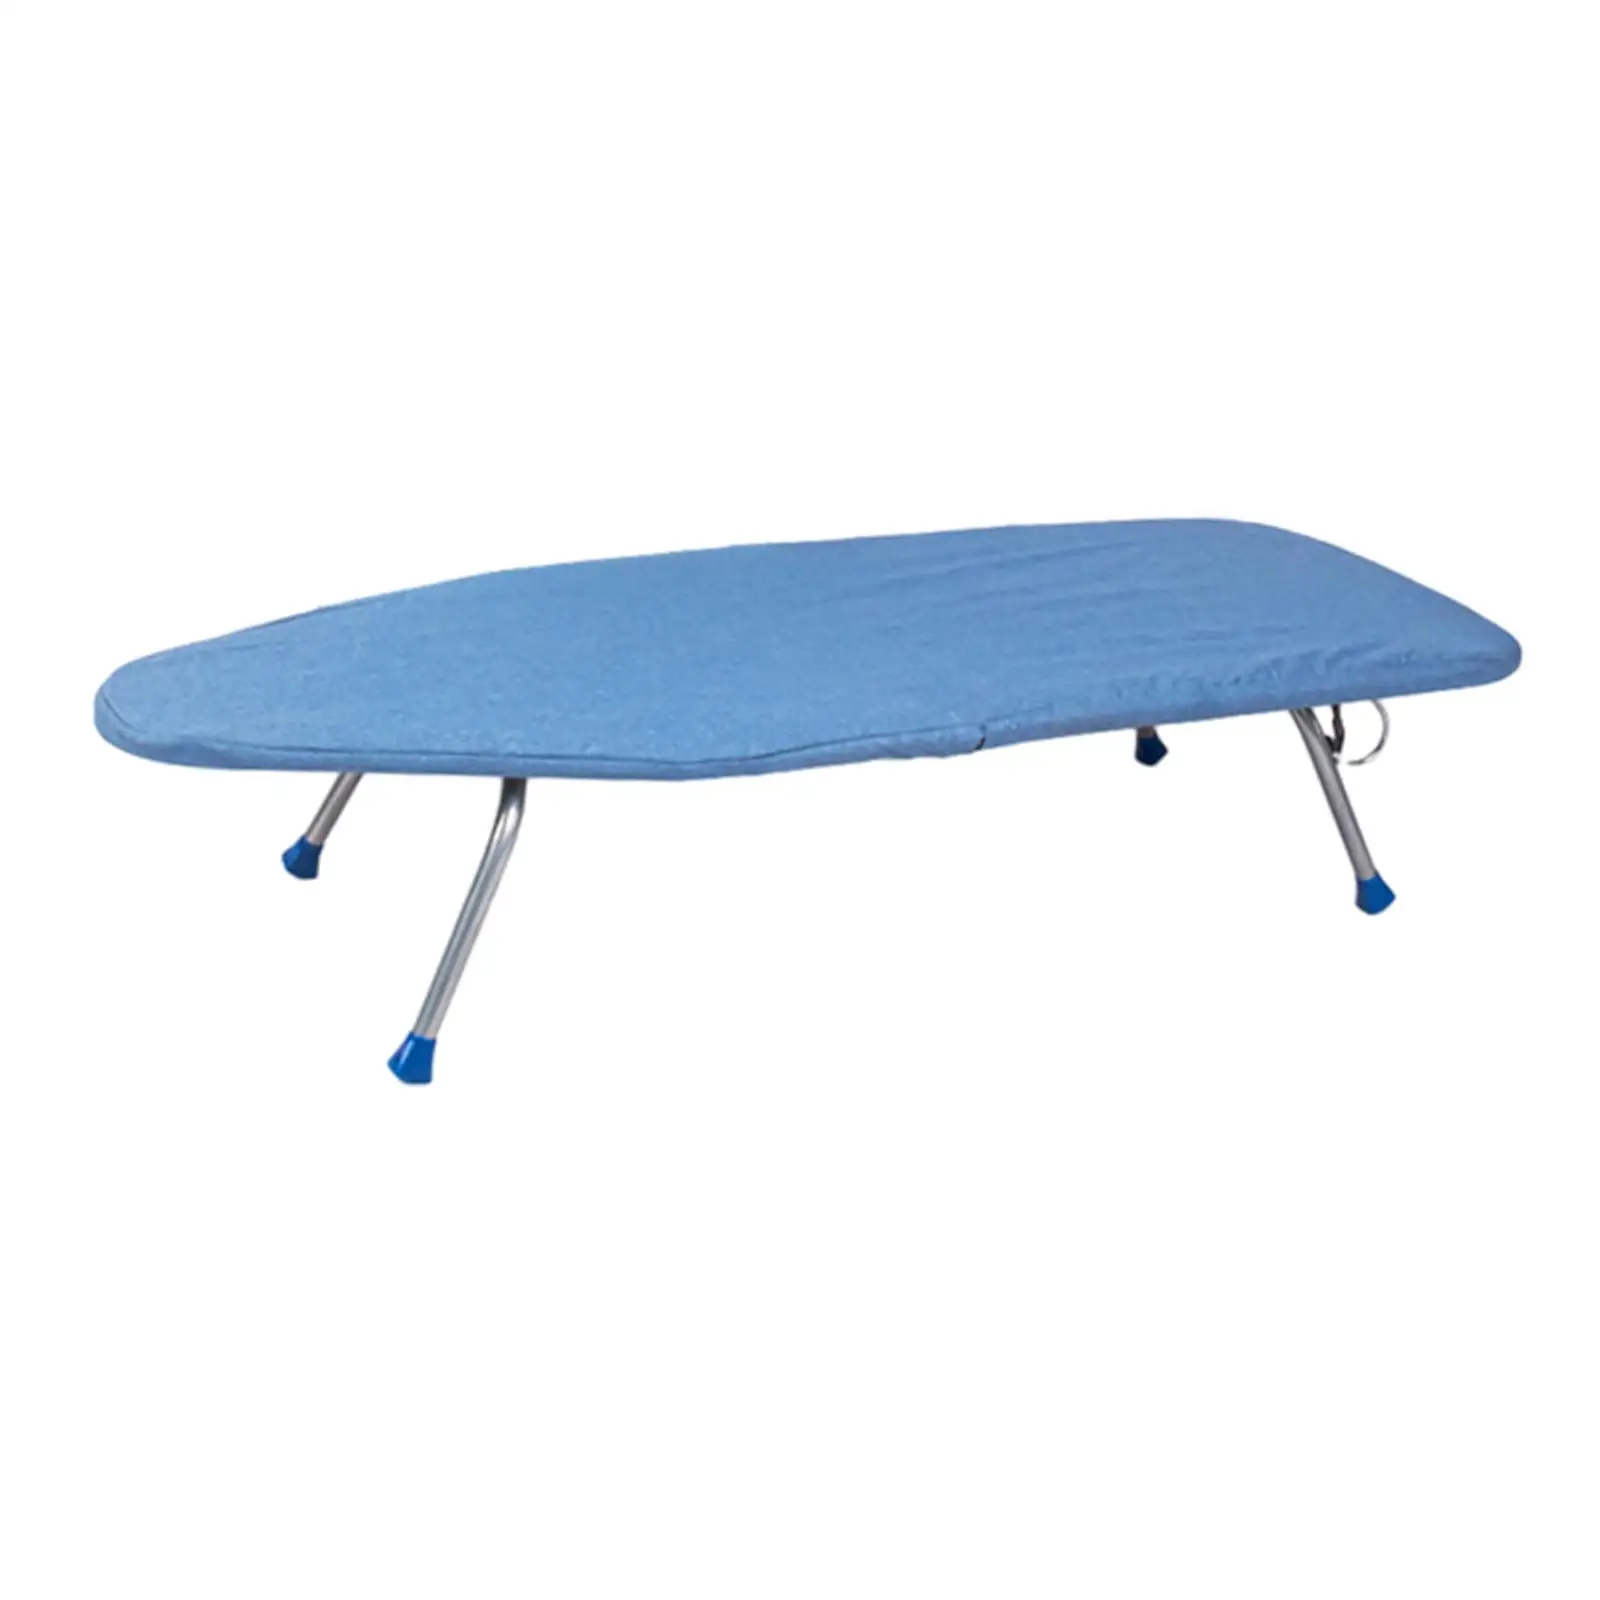 Tabletop Ironing Board Heat Resistant Cover Non Slip Feet Ironing Clothes Compact Portable Ironing Table for Laundry Room